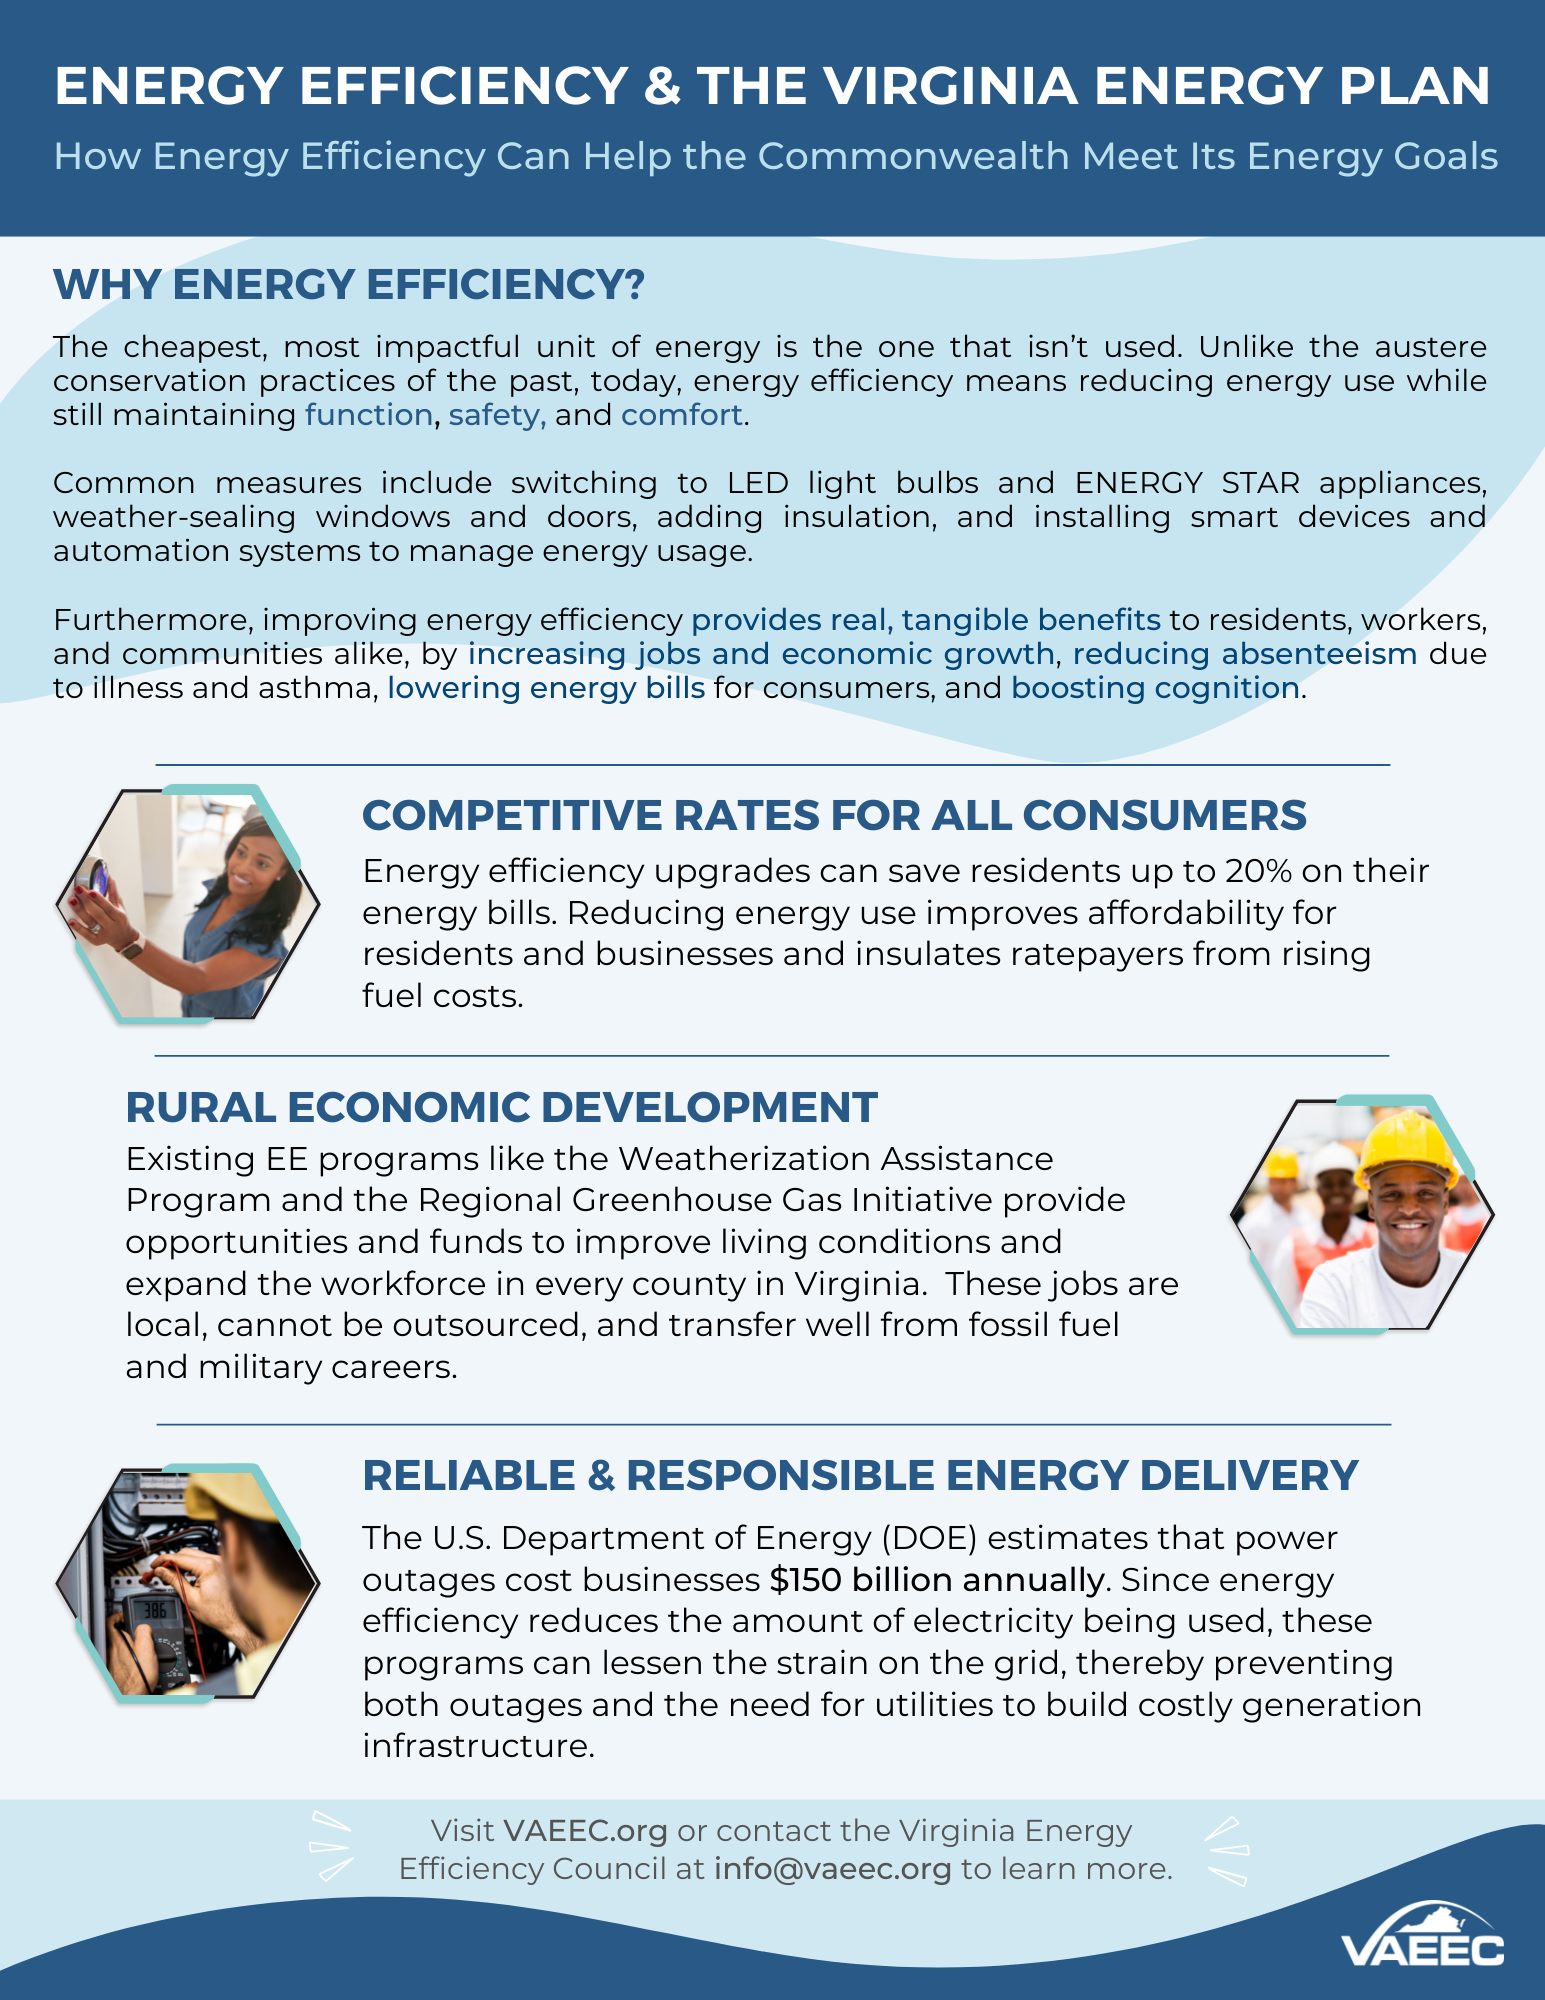 an-introduction-to-energy-efficiency-virginia-energy-efficiency-council